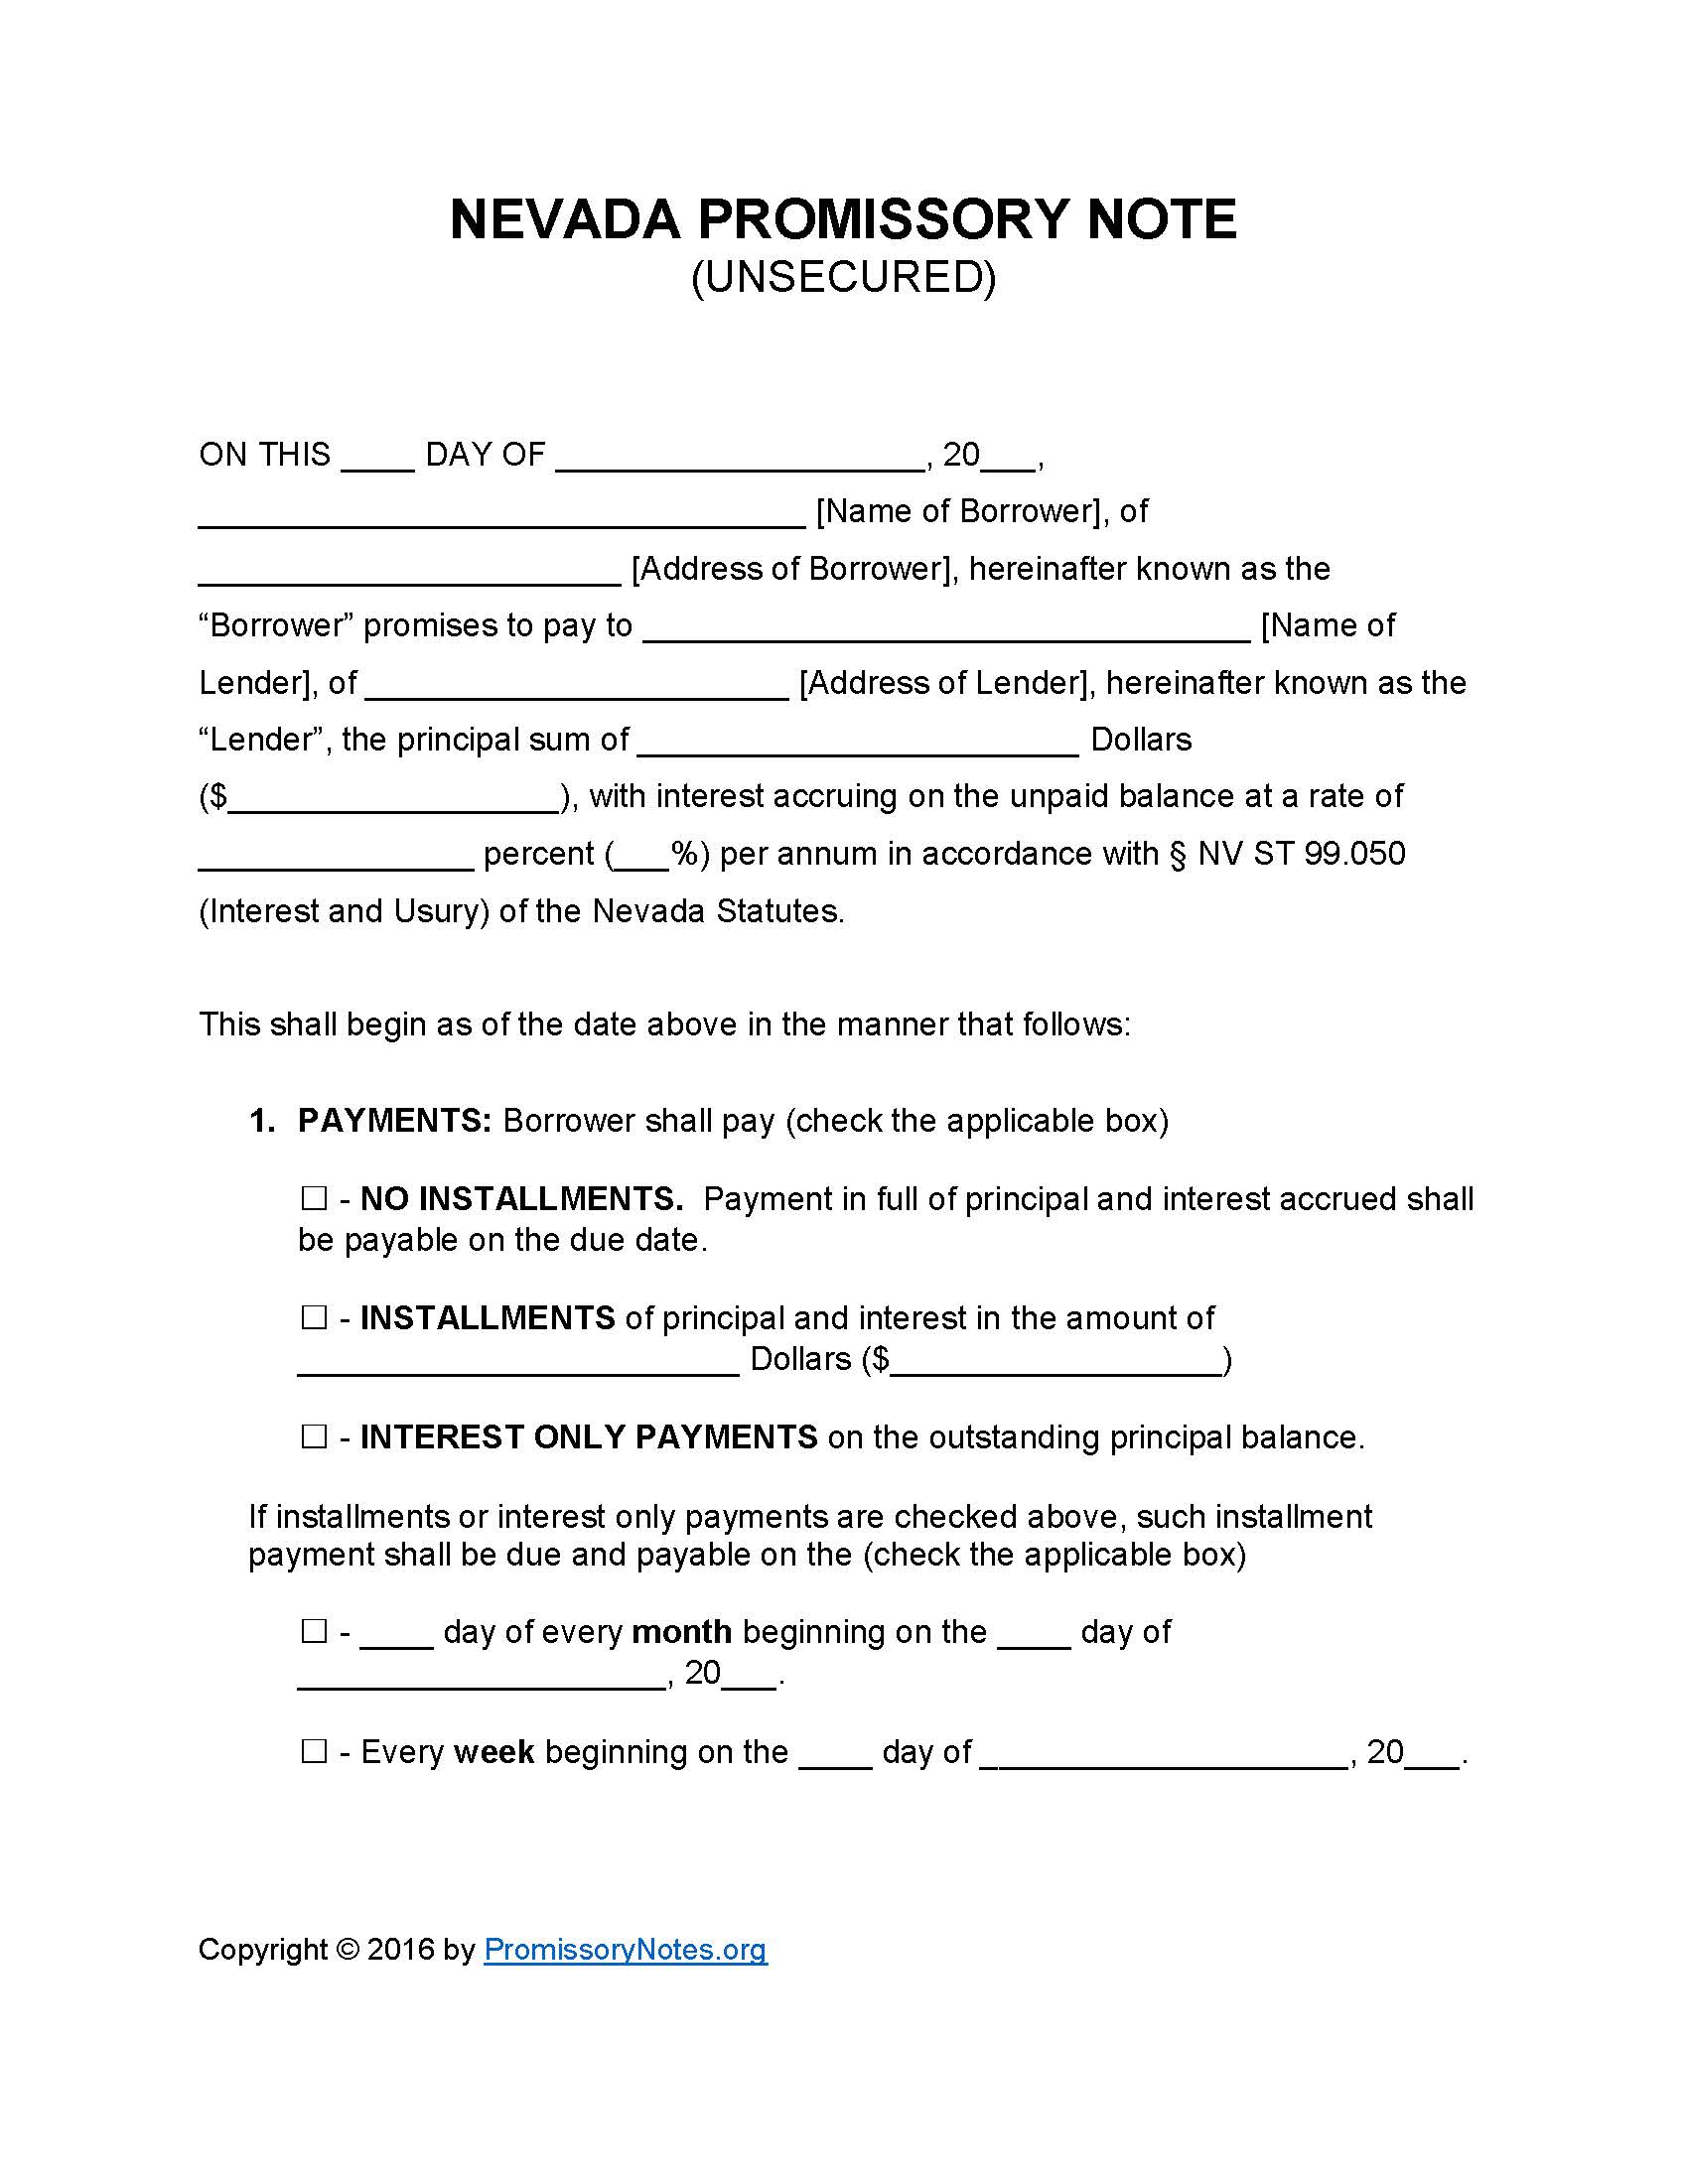 nevada-unsecured-promissory-note-form